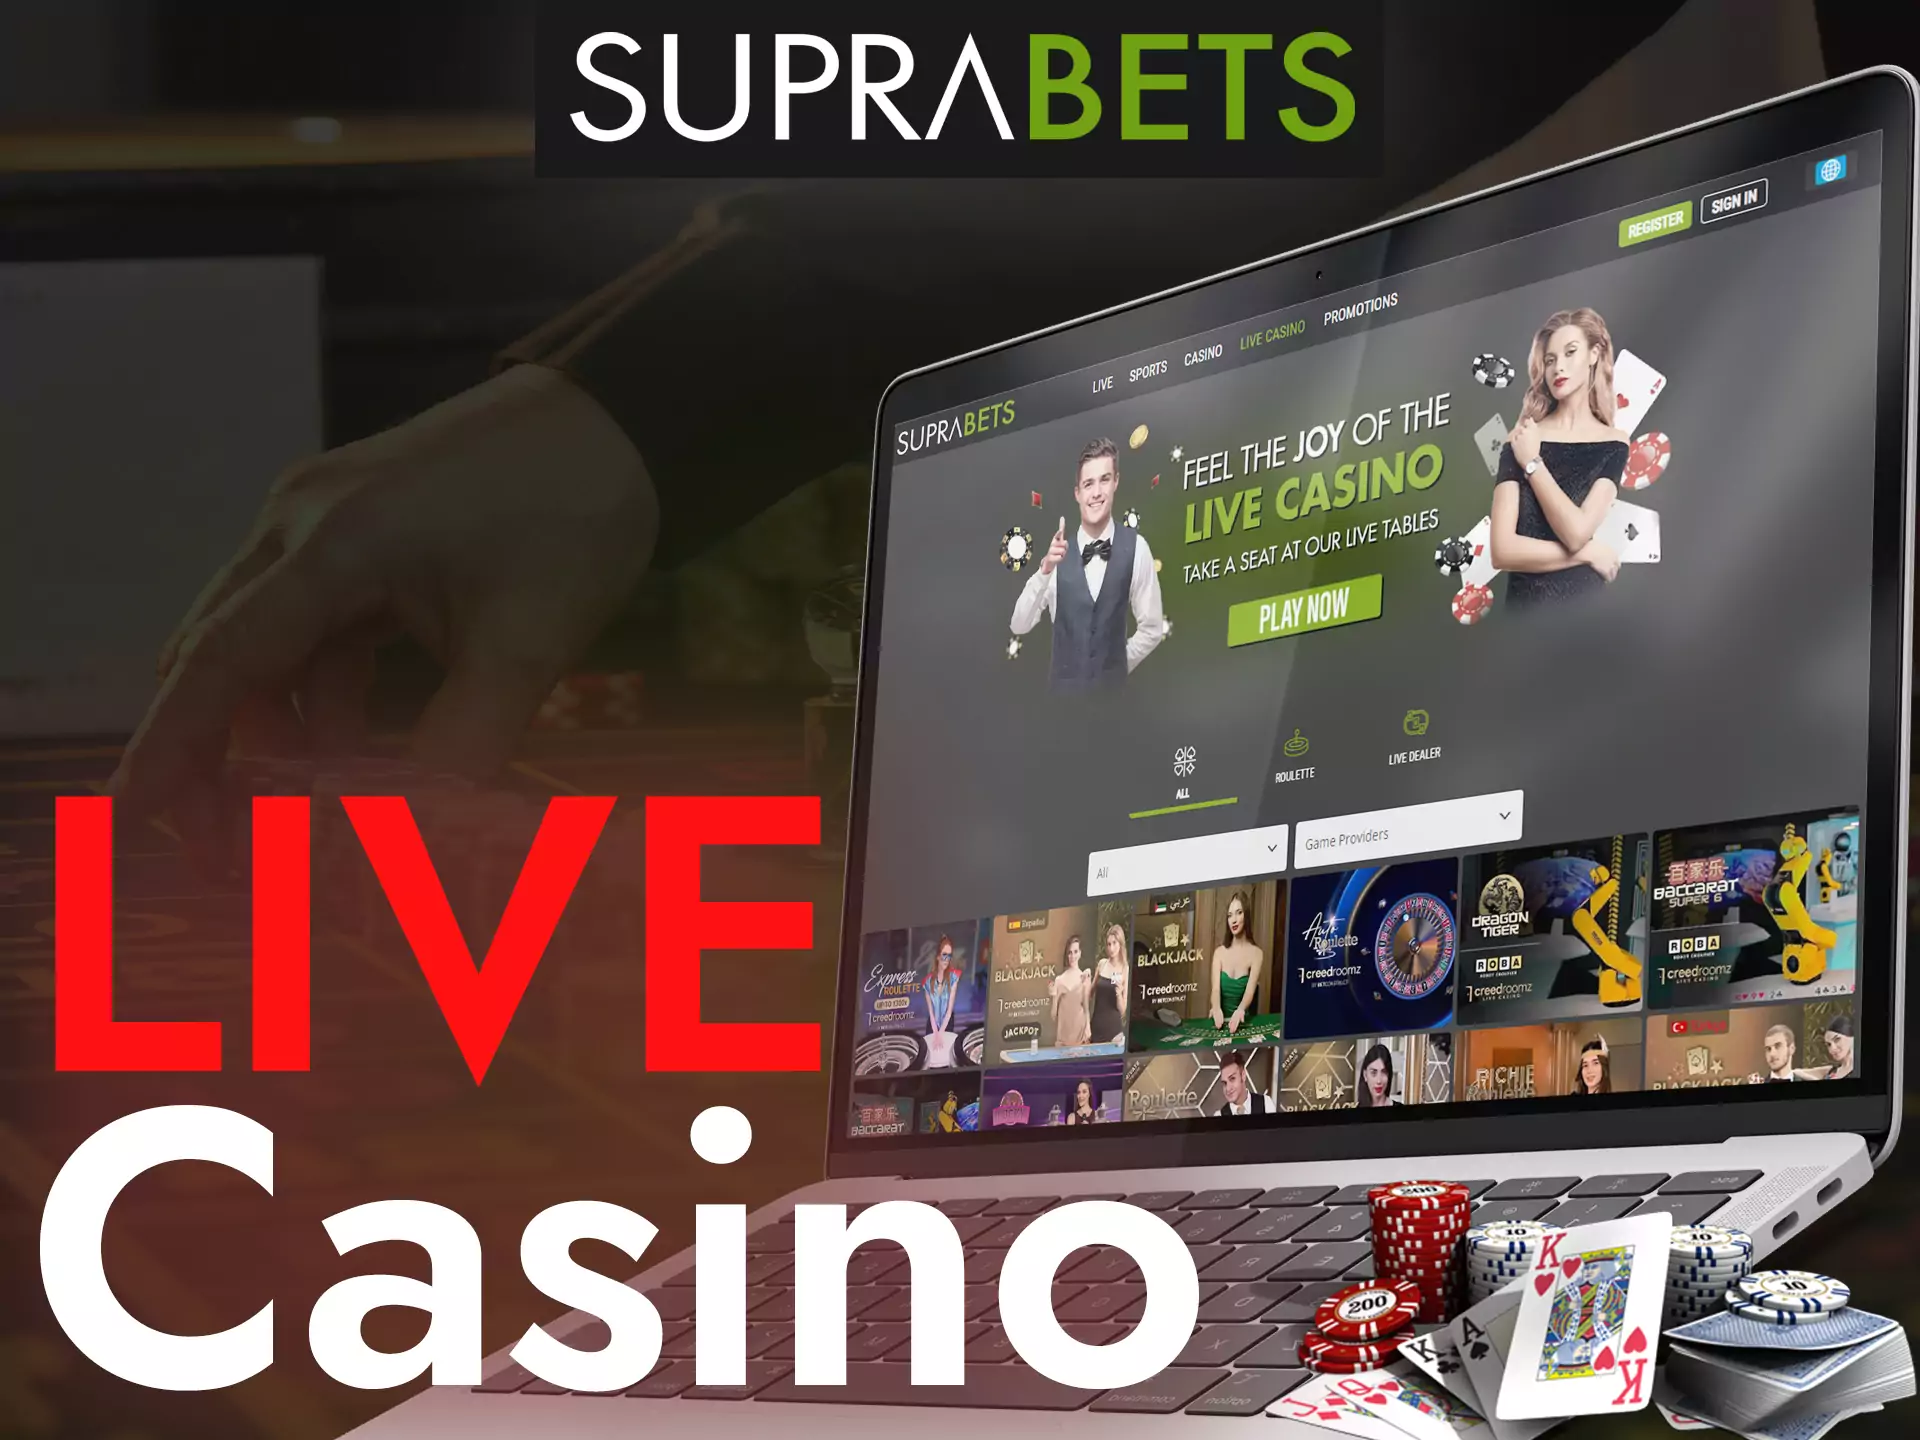 Go to the Suprabets live casino section, play different games with dealers.